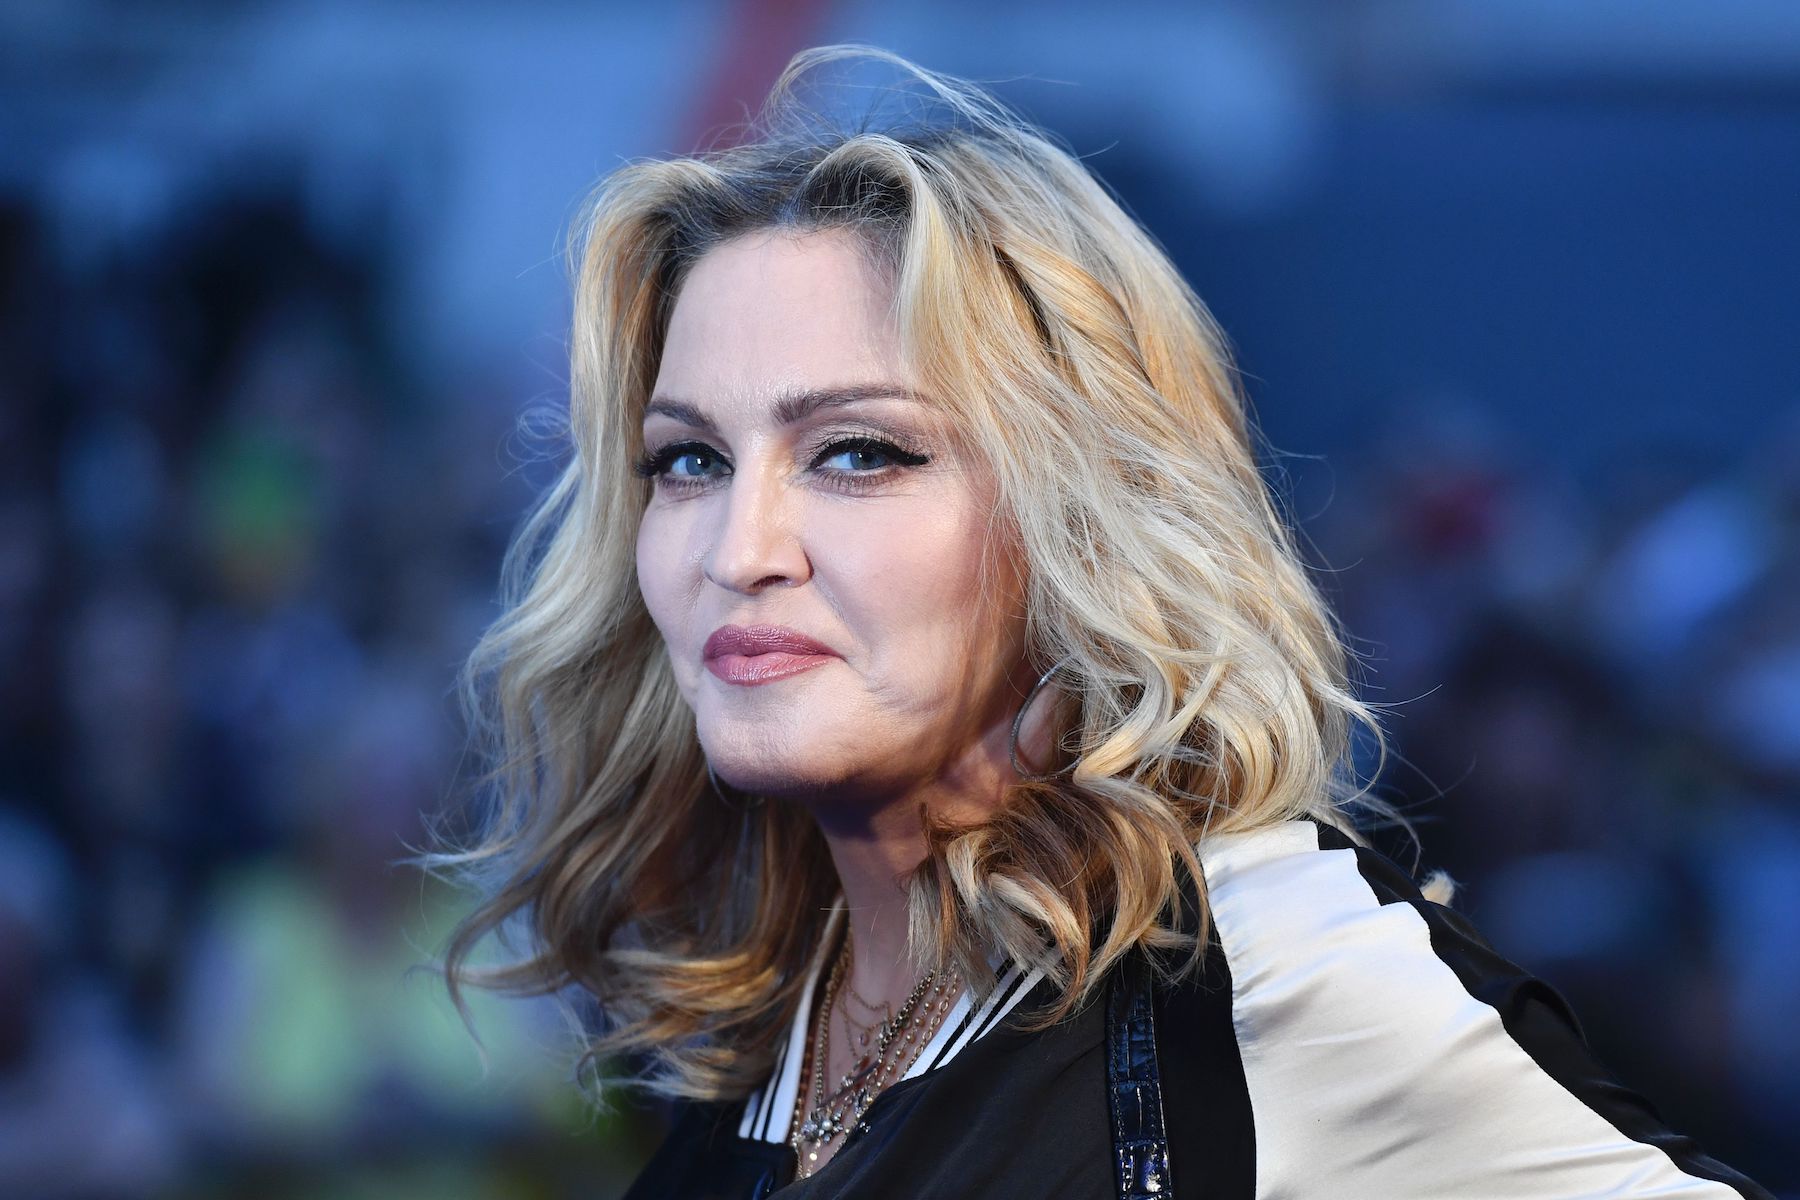 Madonna is Going on Tour to Celebrate 40 Years of Her Music Career